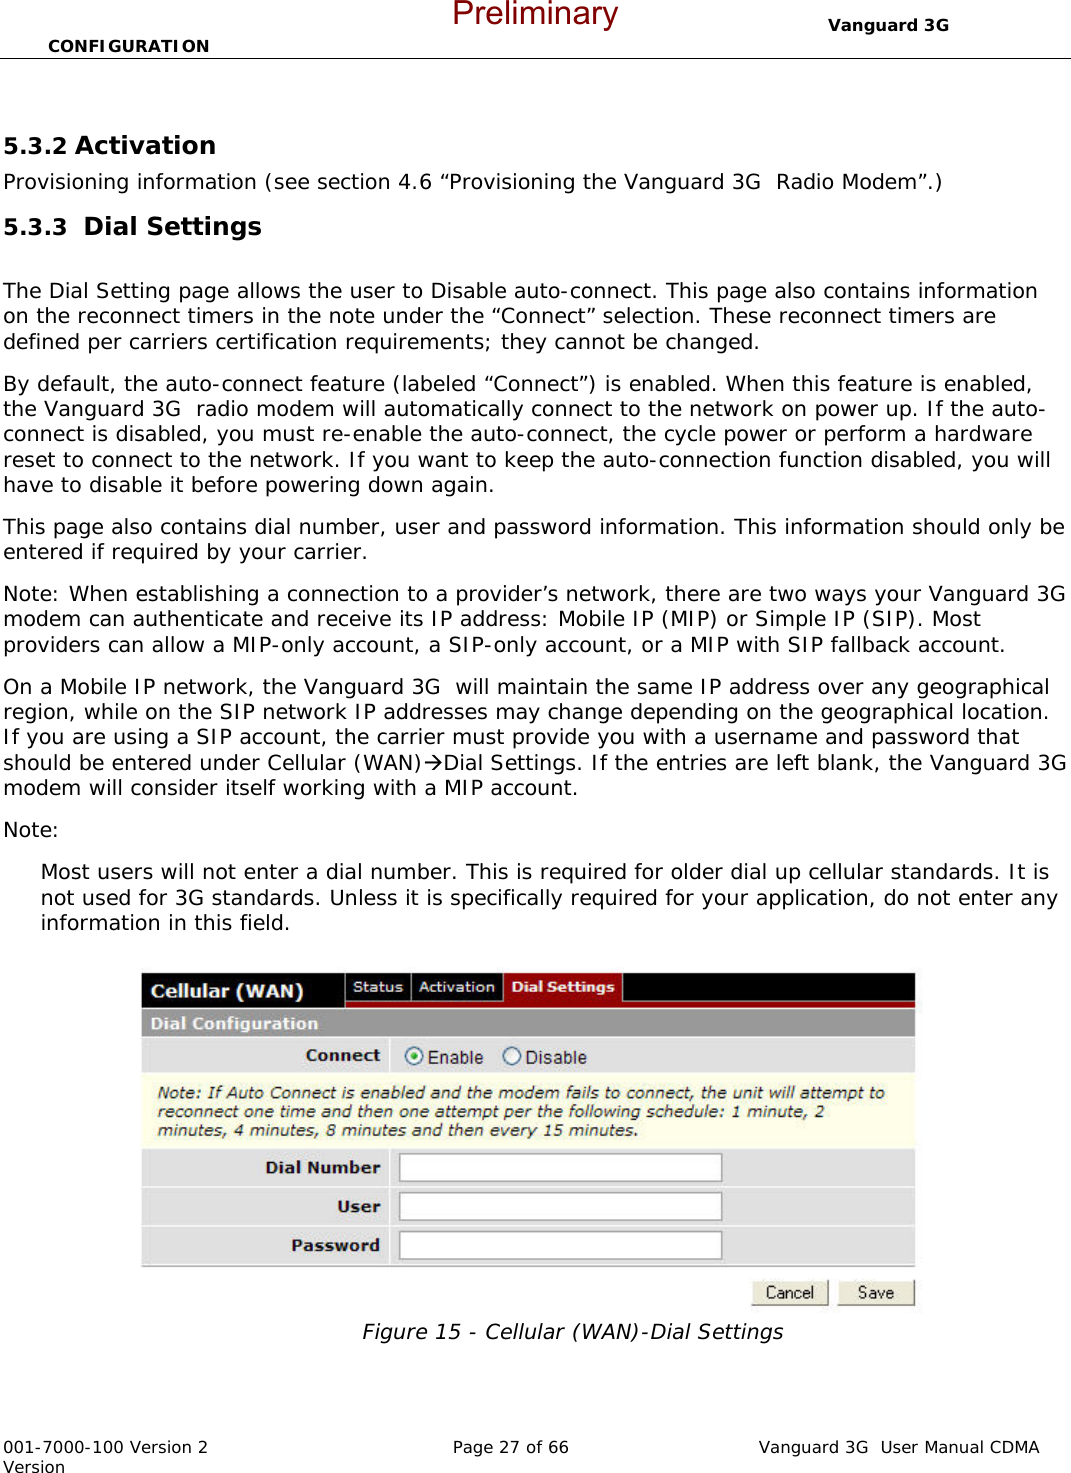                                  Vanguard 3G  CONFIGURATION  001-7000-100 Version 2       Page 27 of 66       Vanguard 3G  User Manual CDMA Version  5.3.2 Activation  Provisioning information (see section 4.6 “Provisioning the Vanguard 3G  Radio Modem”.)  5.3.3  Dial Settings   The Dial Setting page allows the user to Disable auto-connect. This page also contains information on the reconnect timers in the note under the “Connect” selection. These reconnect timers are defined per carriers certification requirements; they cannot be changed. By default, the auto-connect feature (labeled “Connect”) is enabled. When this feature is enabled, the Vanguard 3G  radio modem will automatically connect to the network on power up. If the auto-connect is disabled, you must re-enable the auto-connect, the cycle power or perform a hardware reset to connect to the network. If you want to keep the auto-connection function disabled, you will have to disable it before powering down again. This page also contains dial number, user and password information. This information should only be entered if required by your carrier.  Note: When establishing a connection to a provider’s network, there are two ways your Vanguard 3G  modem can authenticate and receive its IP address: Mobile IP (MIP) or Simple IP (SIP). Most providers can allow a MIP-only account, a SIP-only account, or a MIP with SIP fallback account. On a Mobile IP network, the Vanguard 3G  will maintain the same IP address over any geographical region, while on the SIP network IP addresses may change depending on the geographical location. If you are using a SIP account, the carrier must provide you with a username and password that should be entered under Cellular (WAN)ÆDial Settings. If the entries are left blank, the Vanguard 3G  modem will consider itself working with a MIP account.  Note:  Most users will not enter a dial number. This is required for older dial up cellular standards. It is not used for 3G standards. Unless it is specifically required for your application, do not enter any information in this field. Figure 15 - Cellular (WAN)-Dial Settings  Preliminary